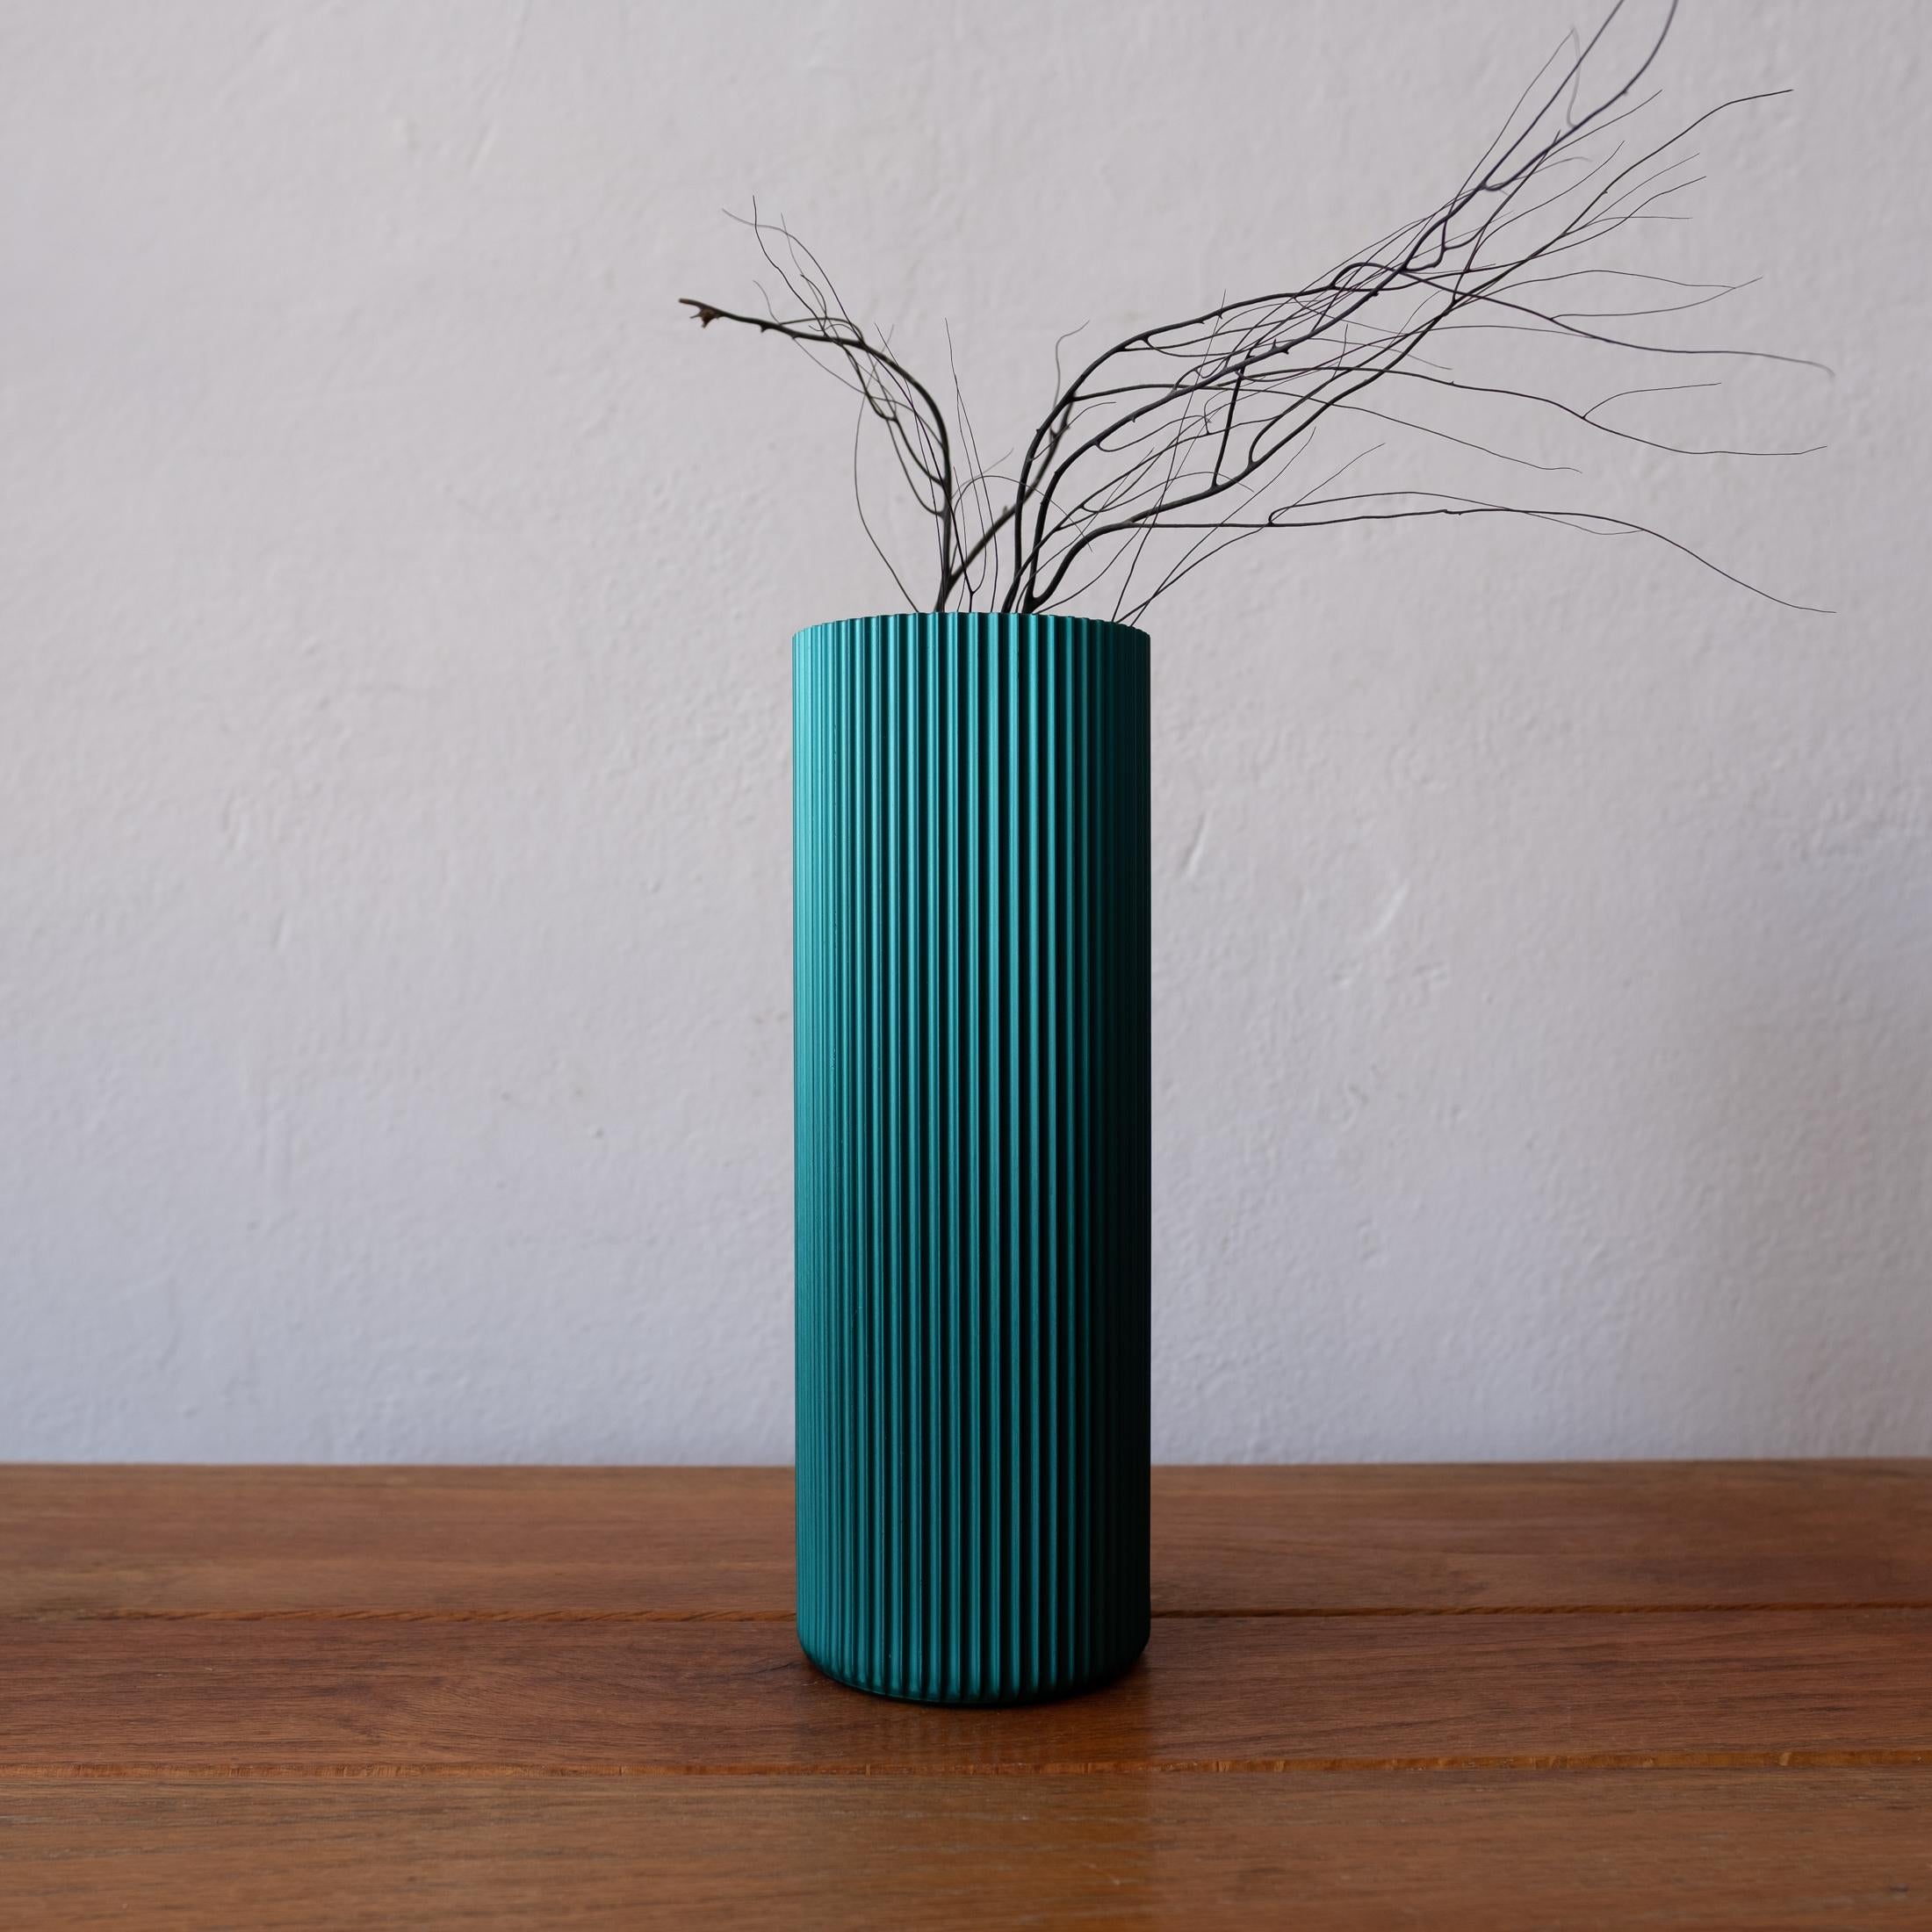 Extruded and anodized aluminum vase, which was introduced as part of the Alcoa Design Forecast program in 1959. The project, which included two books, promoted the use of aluminum in design. Alcoa's Design Forecast program showcased design-oriented